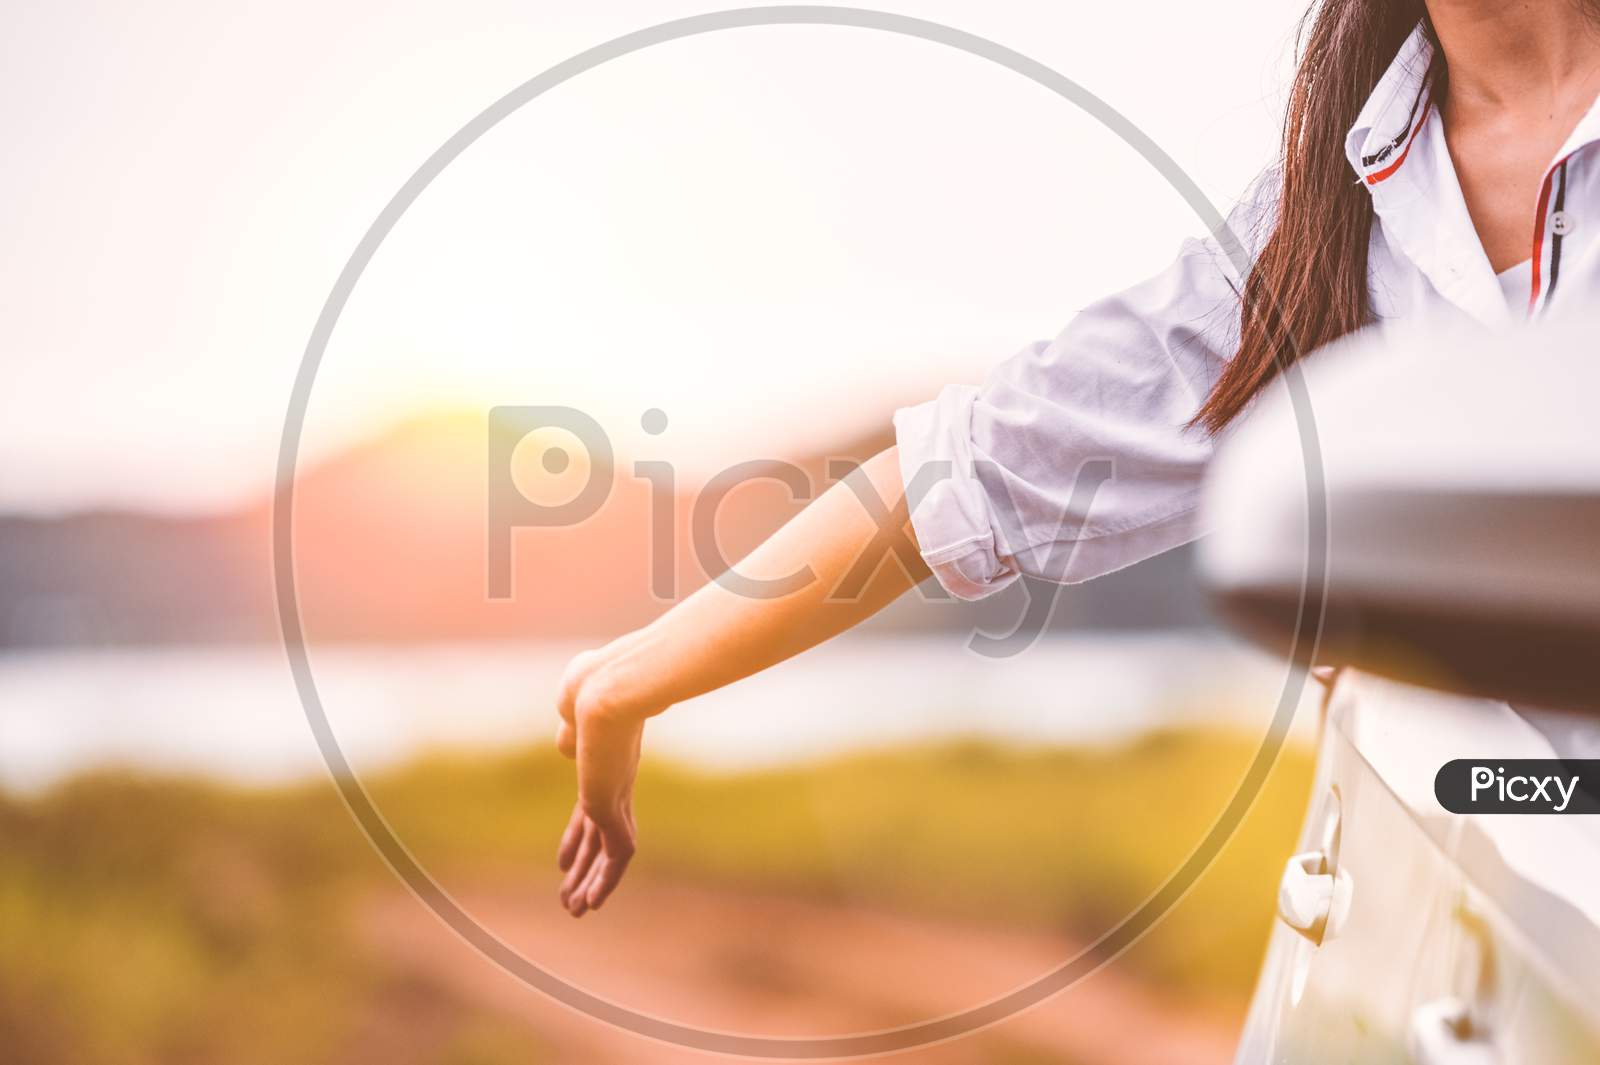 Happy Woman Waving Hand Outside Open Window Car With Meadow And Mountain Lake Background. People Lifestyle Relaxing As Traveler On Road Trip In Holiday Vacation. Transportation And Travel Concept